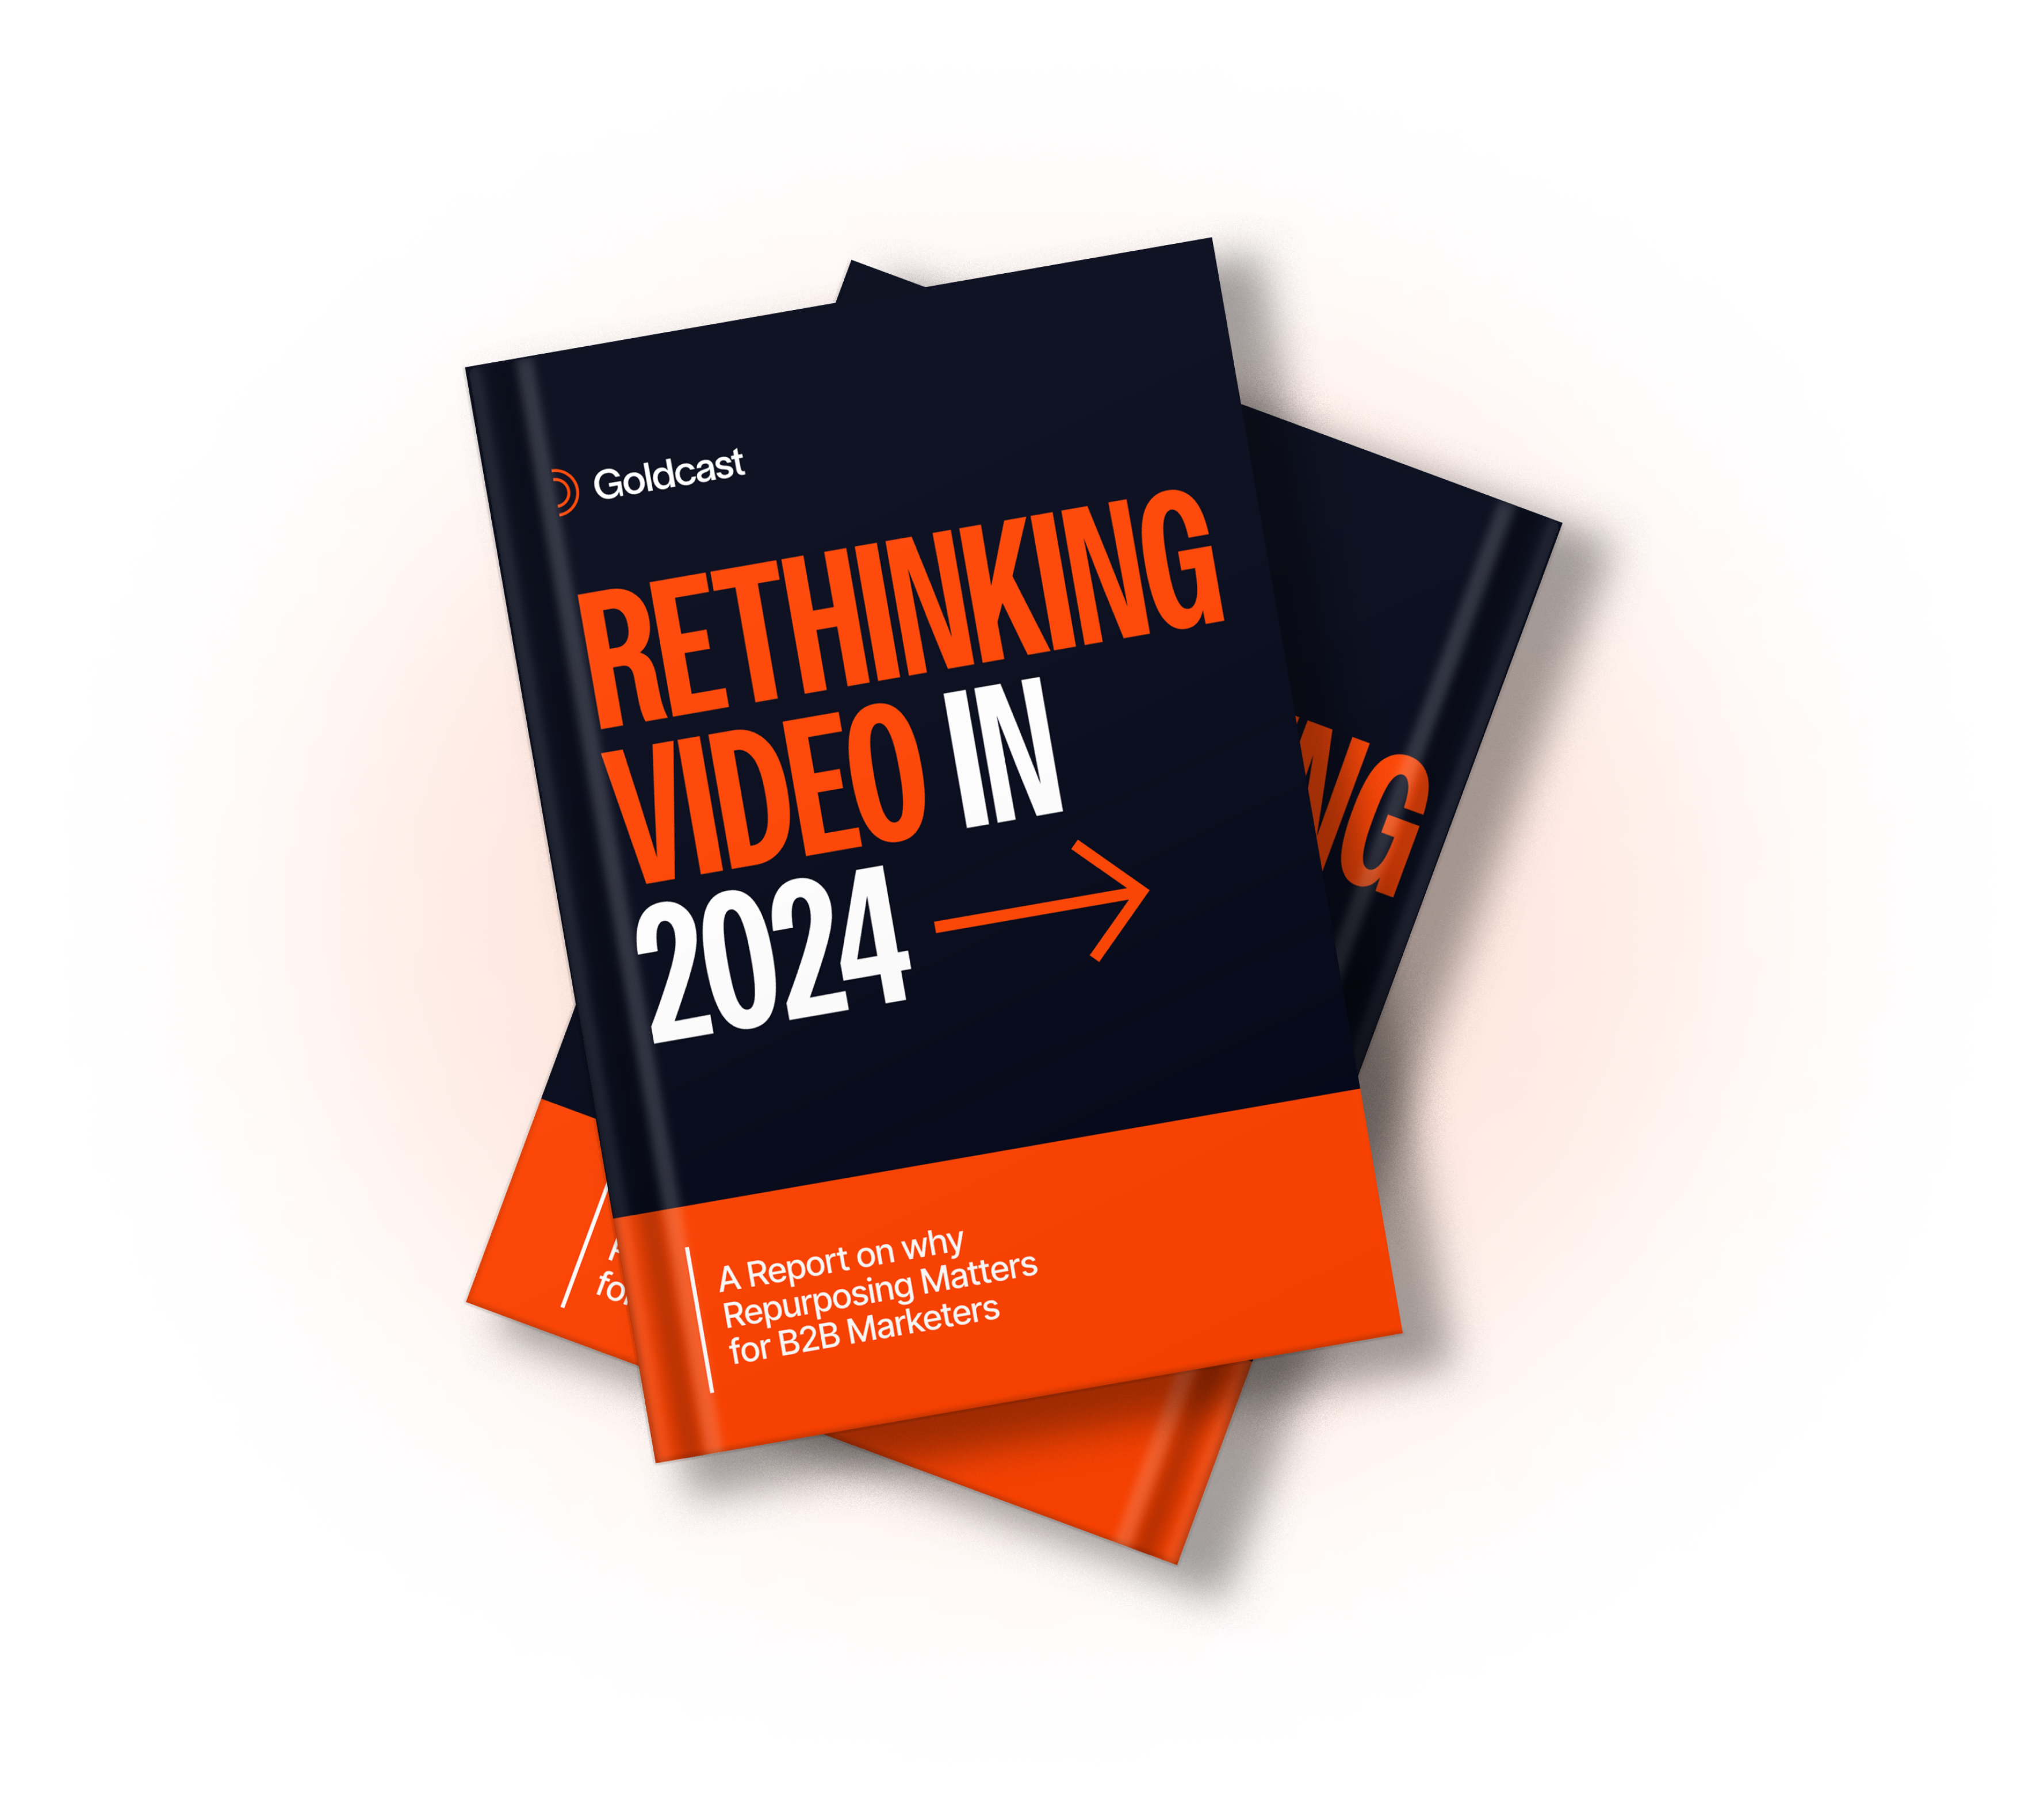 Rethinking Video in 2024: A Report on Why Repurposing Matters for B2B Marketers